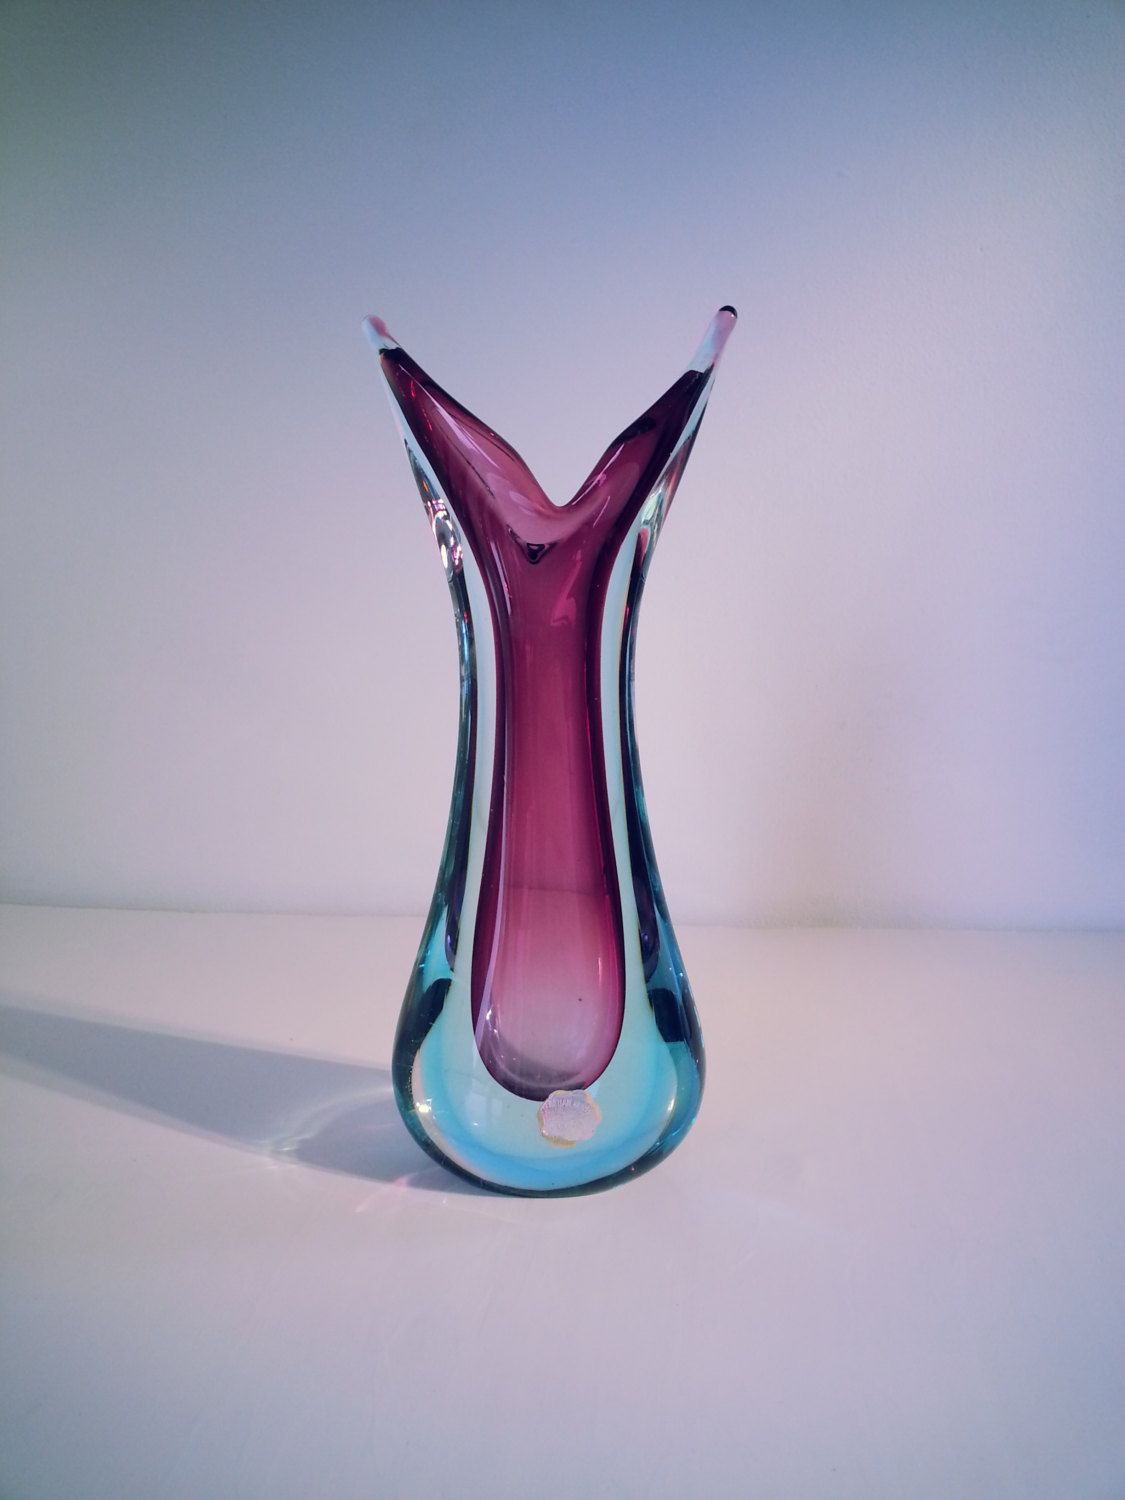 26 Lovely Wide Mouth Vase 2024 free download wide mouth vase of murano sommerso genuine venetian glass 1950s 1960s purple blue within murano sommerso genuine venetian glass 1950s 1960s purple blue glass vase pulled design vase made in 